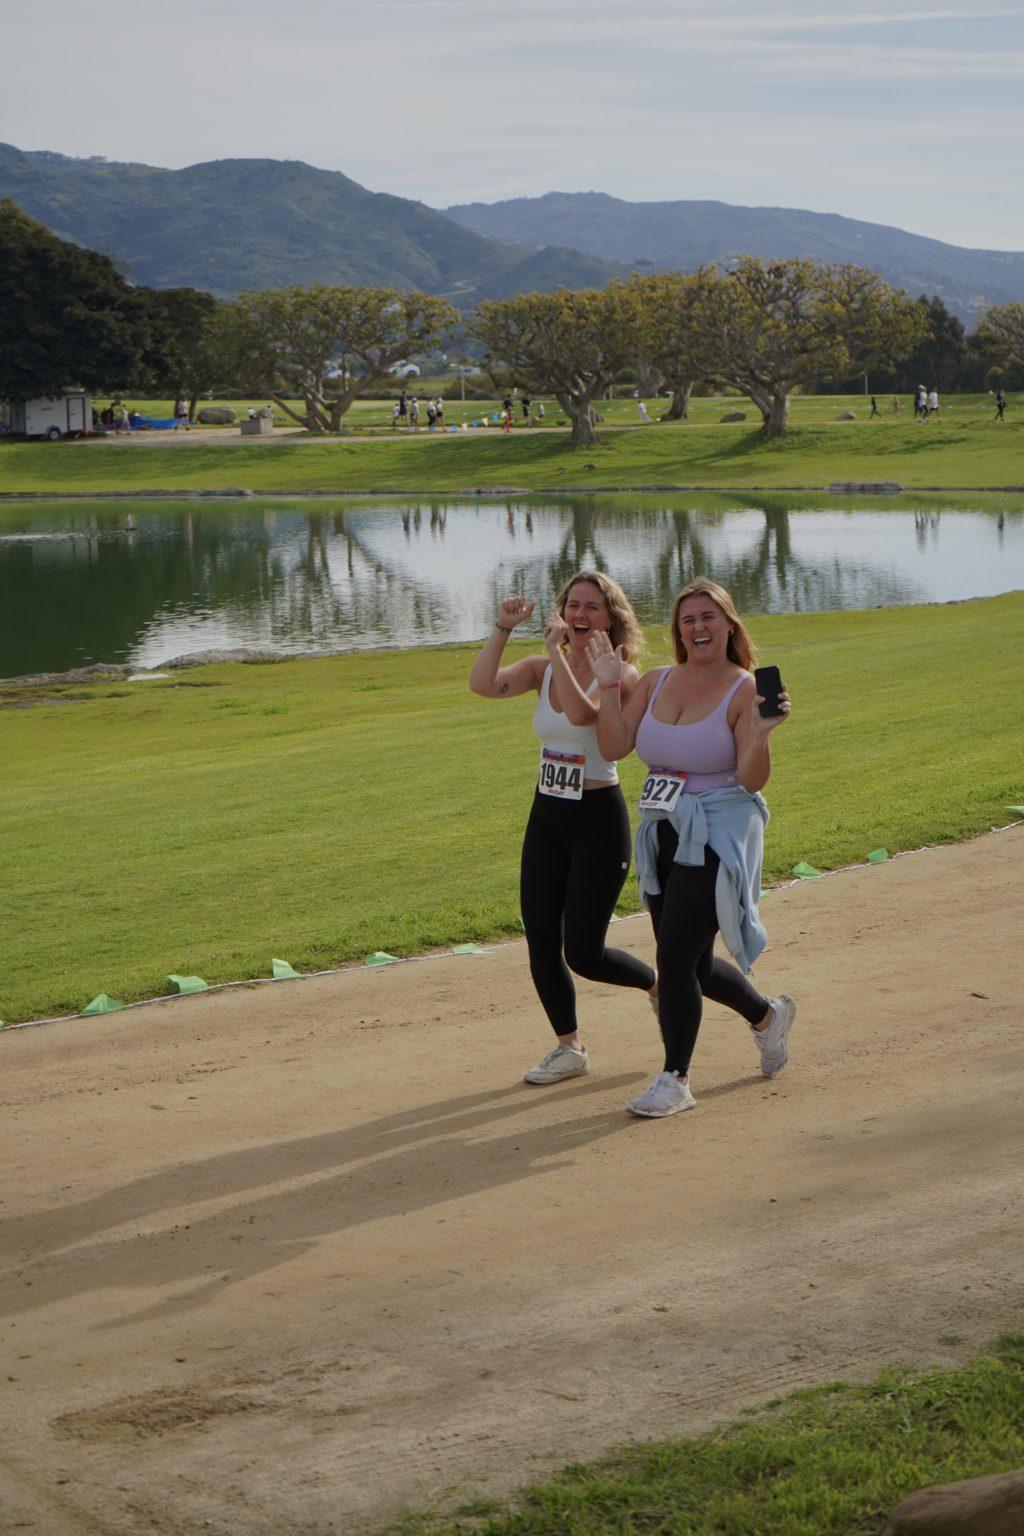 Attendees Maeve Muller (left) and Paige Scully (right) smile and cheer as they complete the 5K March 10, on Lower Alumni Field. Alpha Phi members encouraged participants on throughout the course.